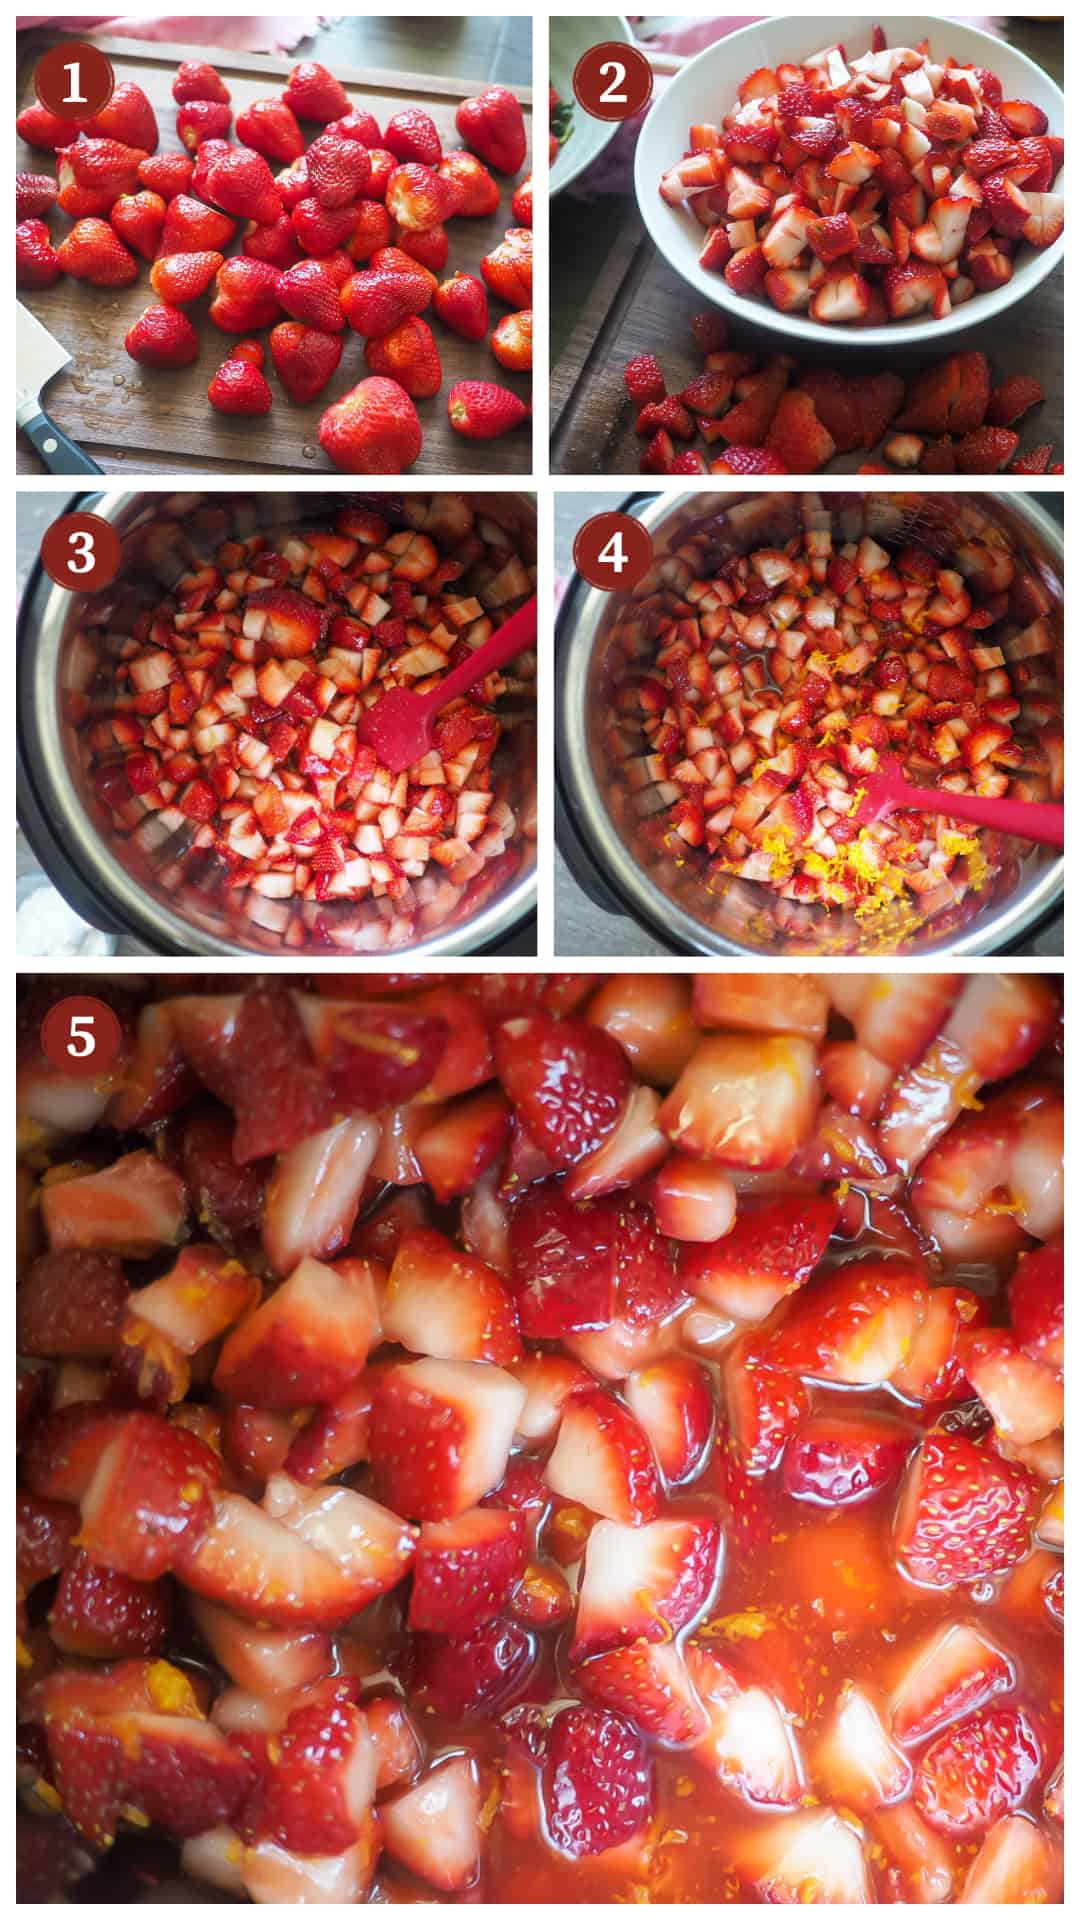 A collage of images showing the process of making paleo strawberry jam in an Instant Pot, steps 1 - 5.